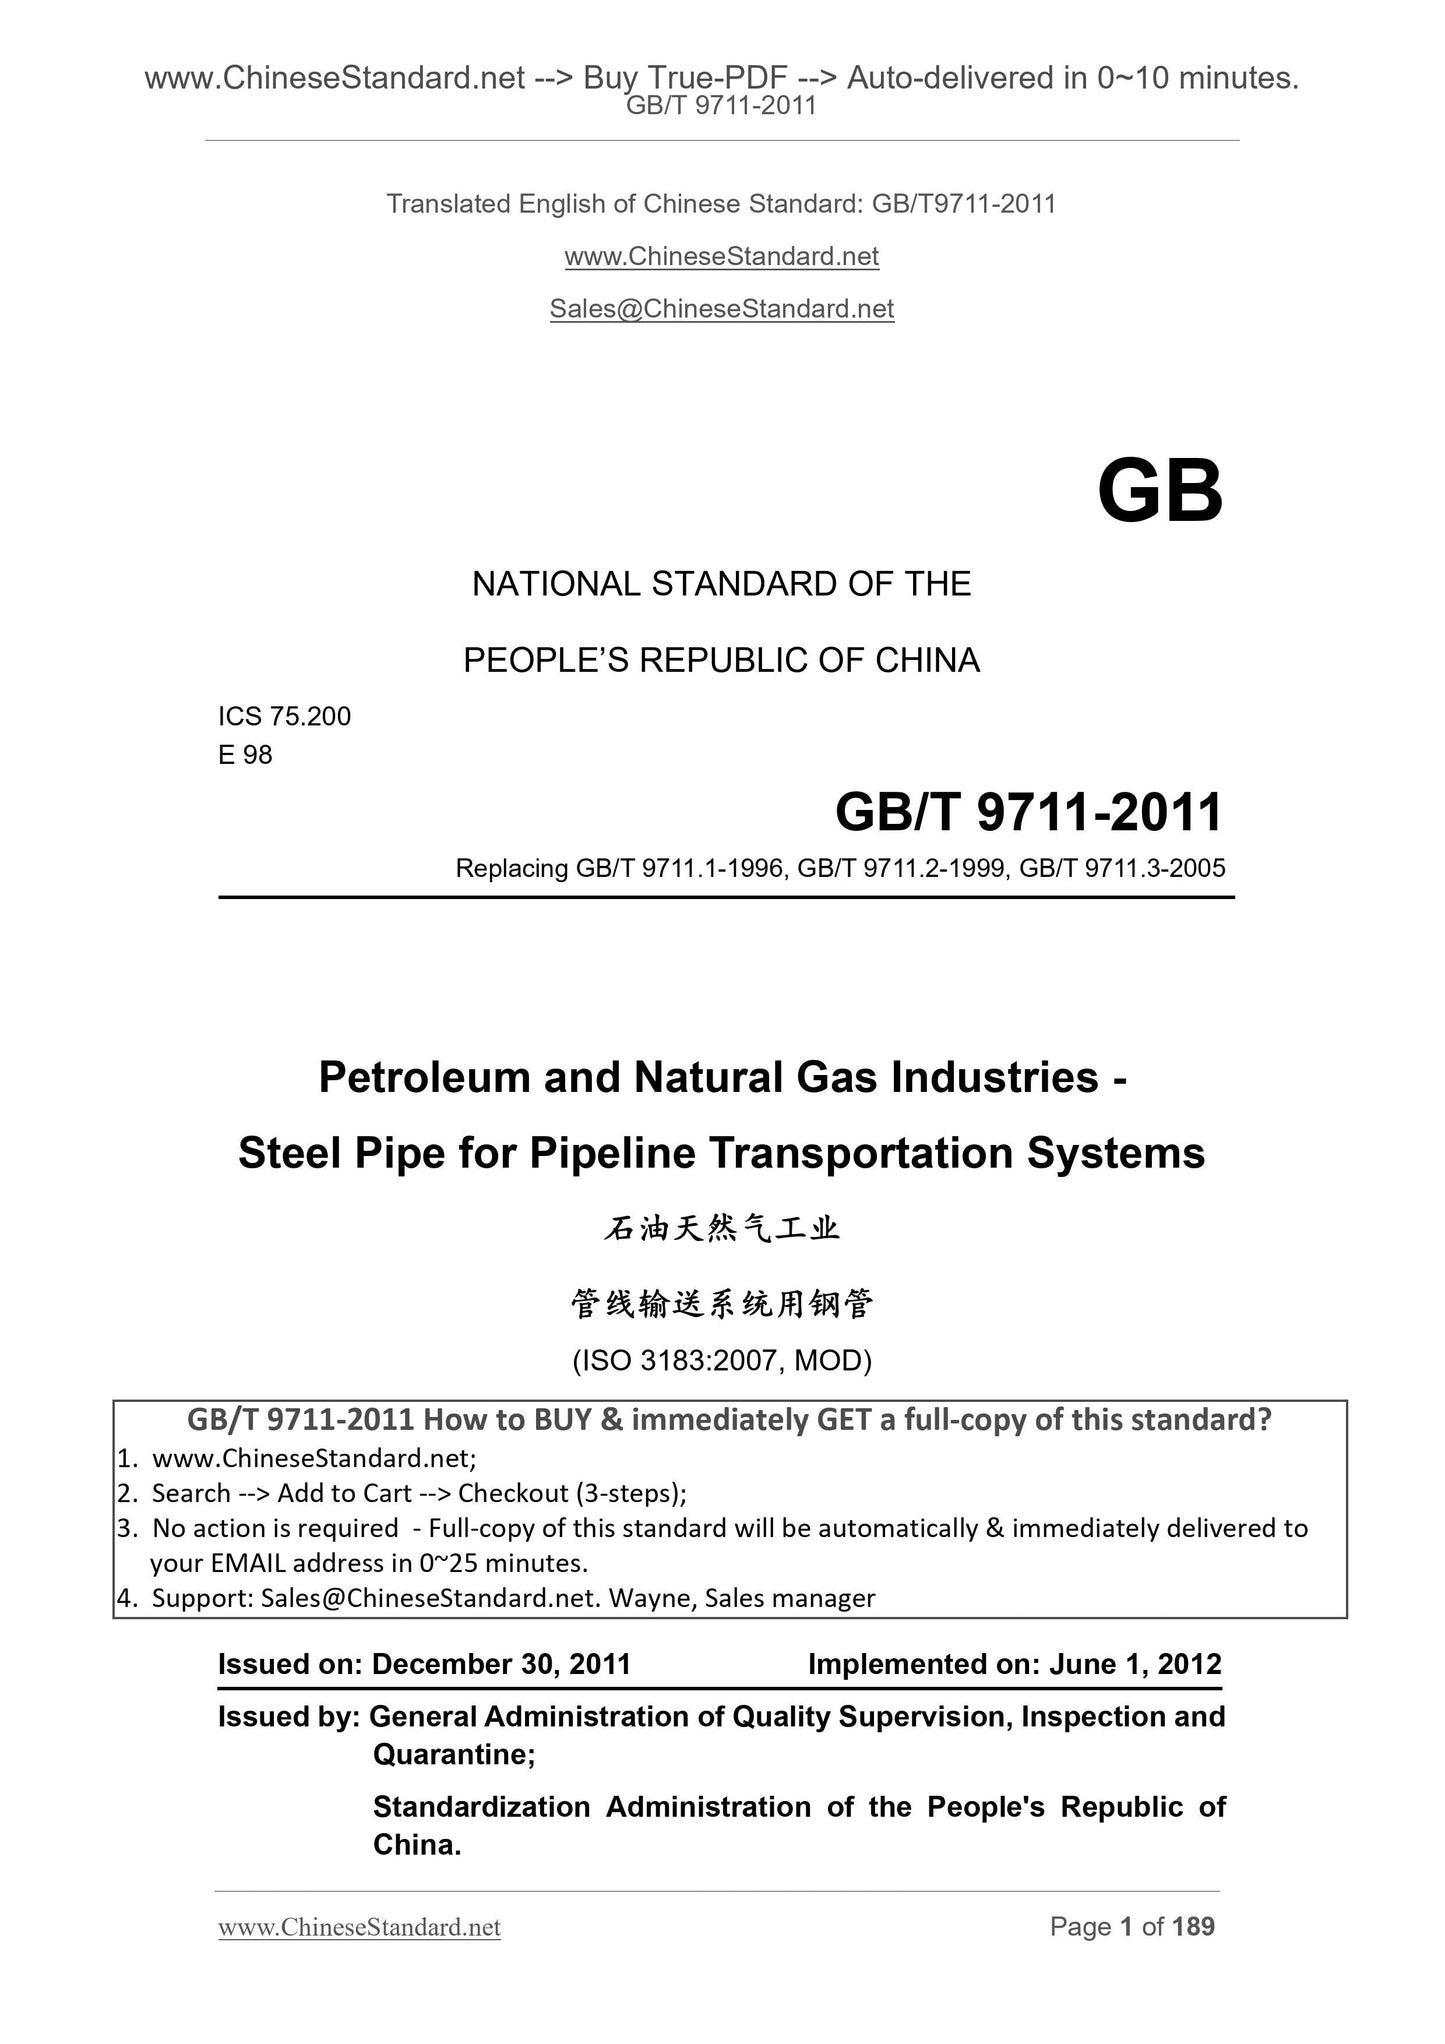 GB/T 9711-2011 Page 1